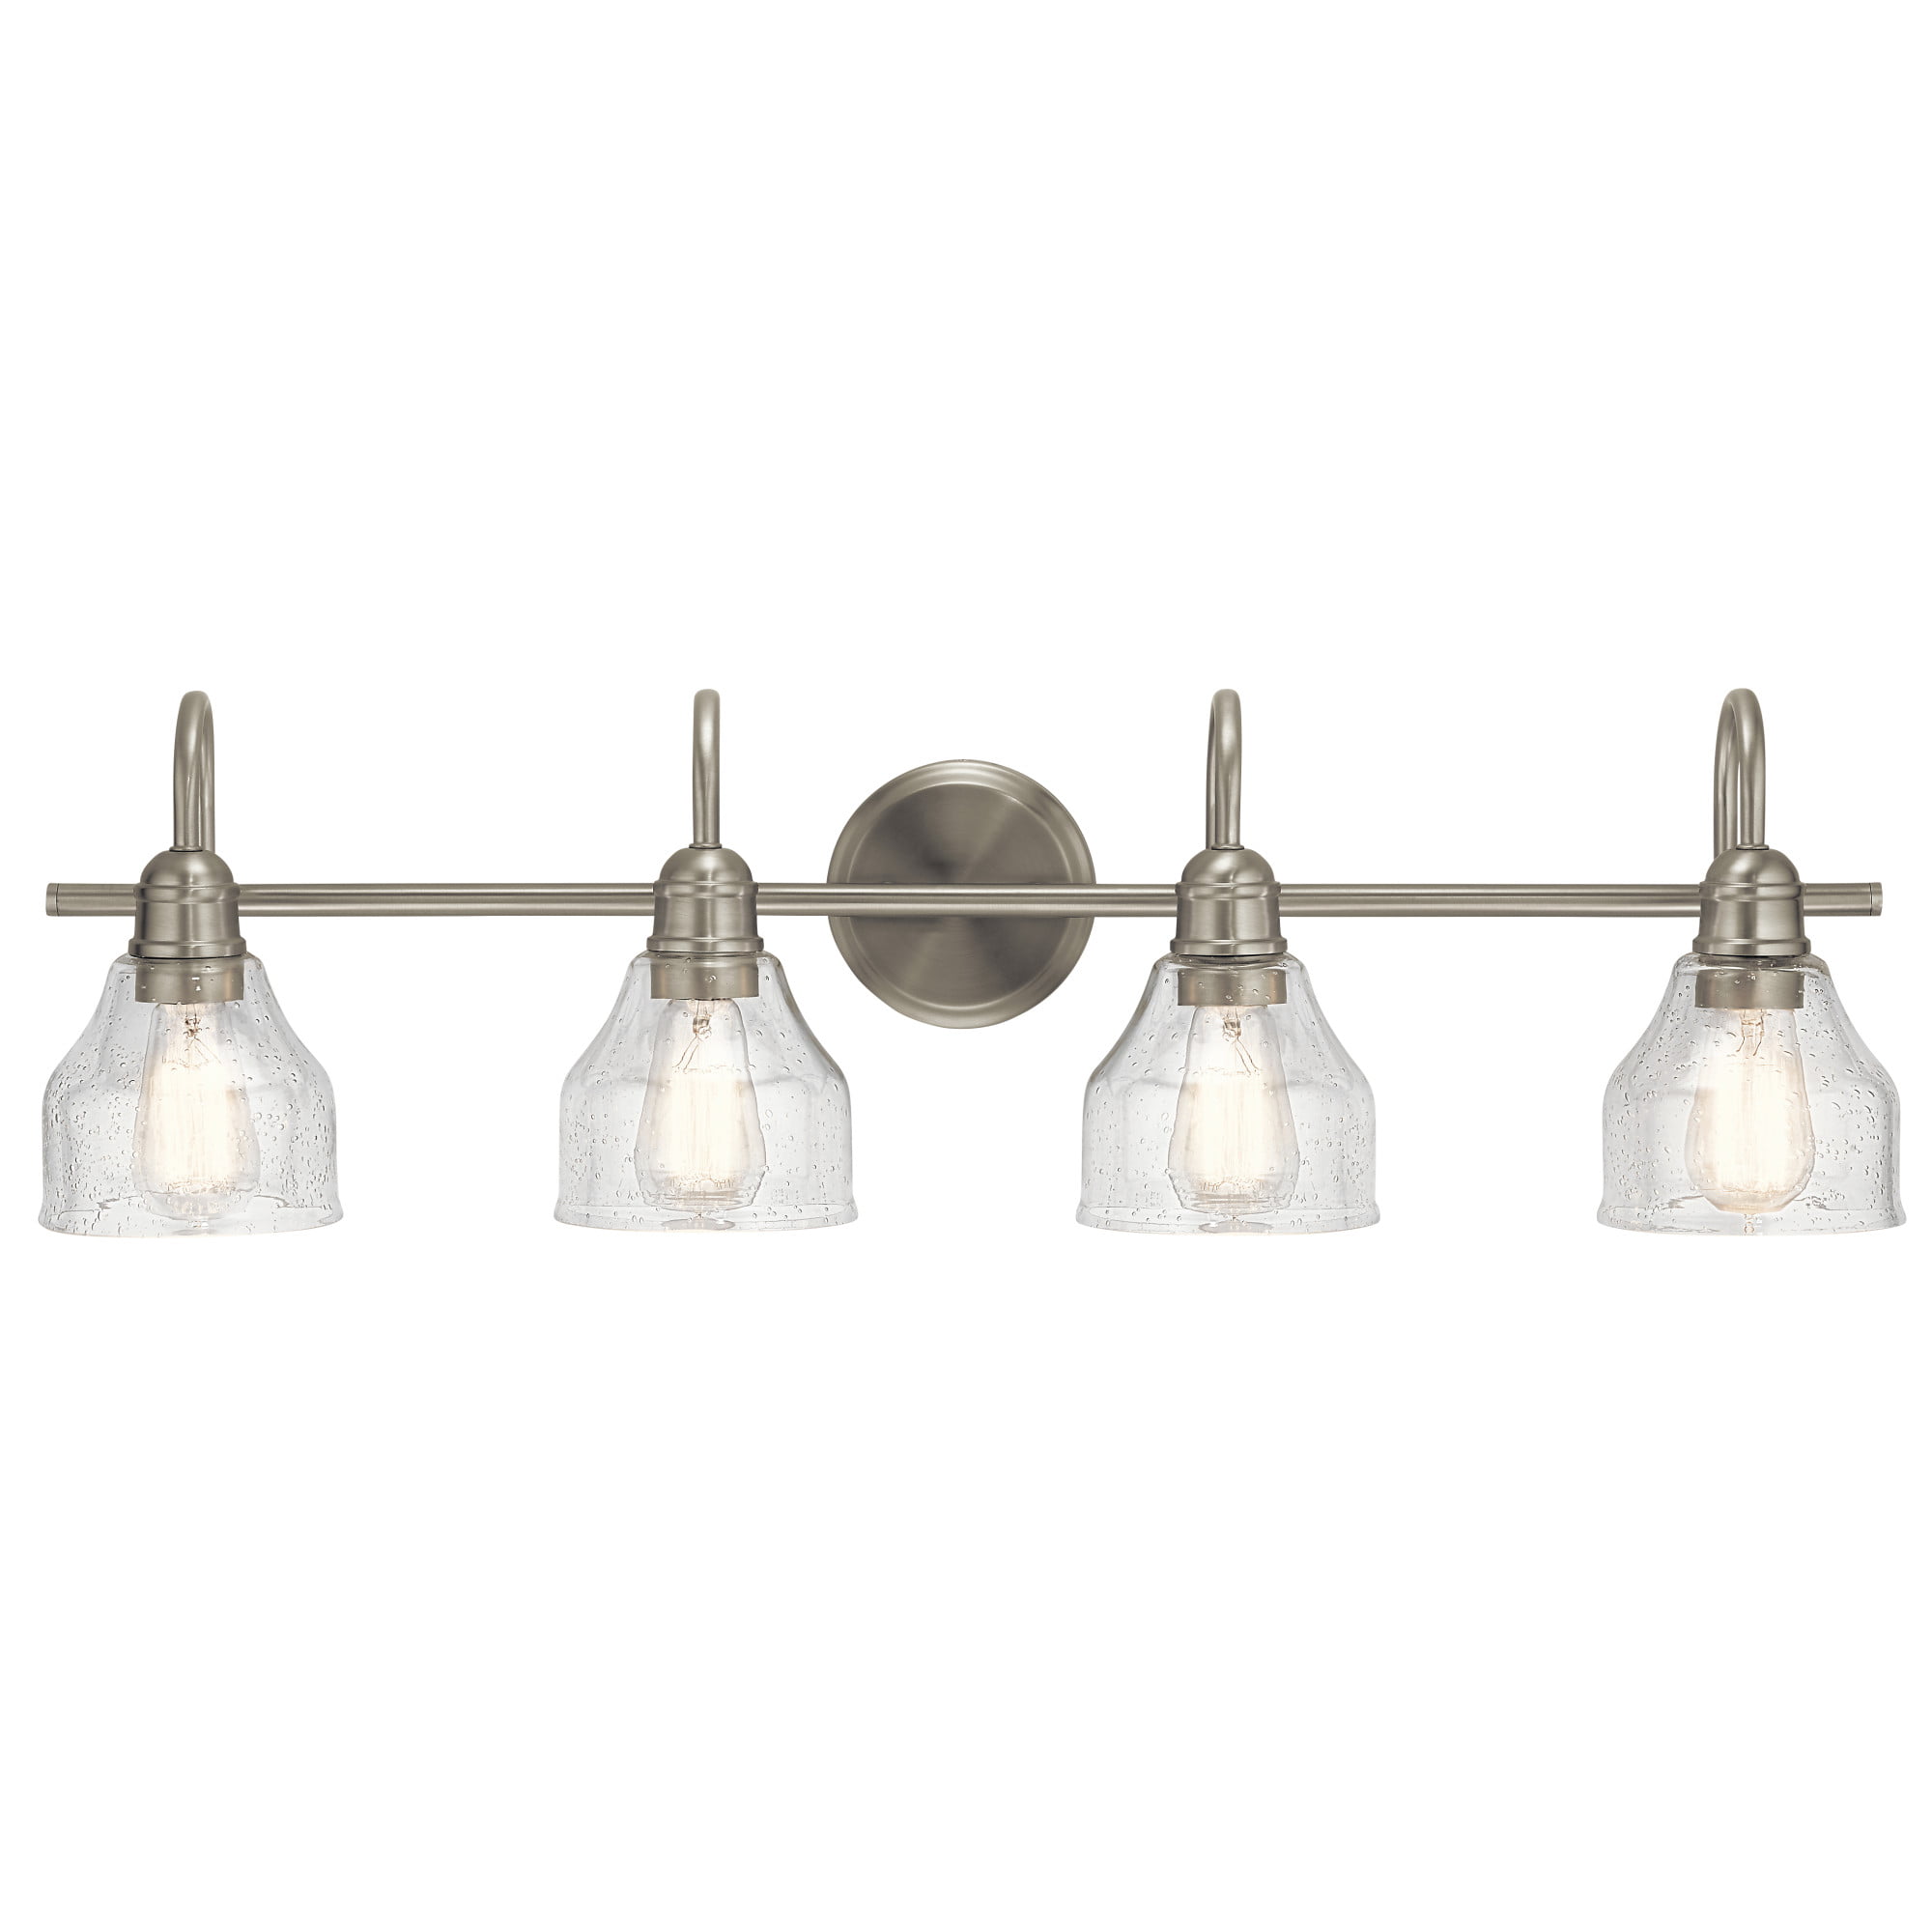 Craftmade Avery 2 Light Polished Nickel Wall Sconce 